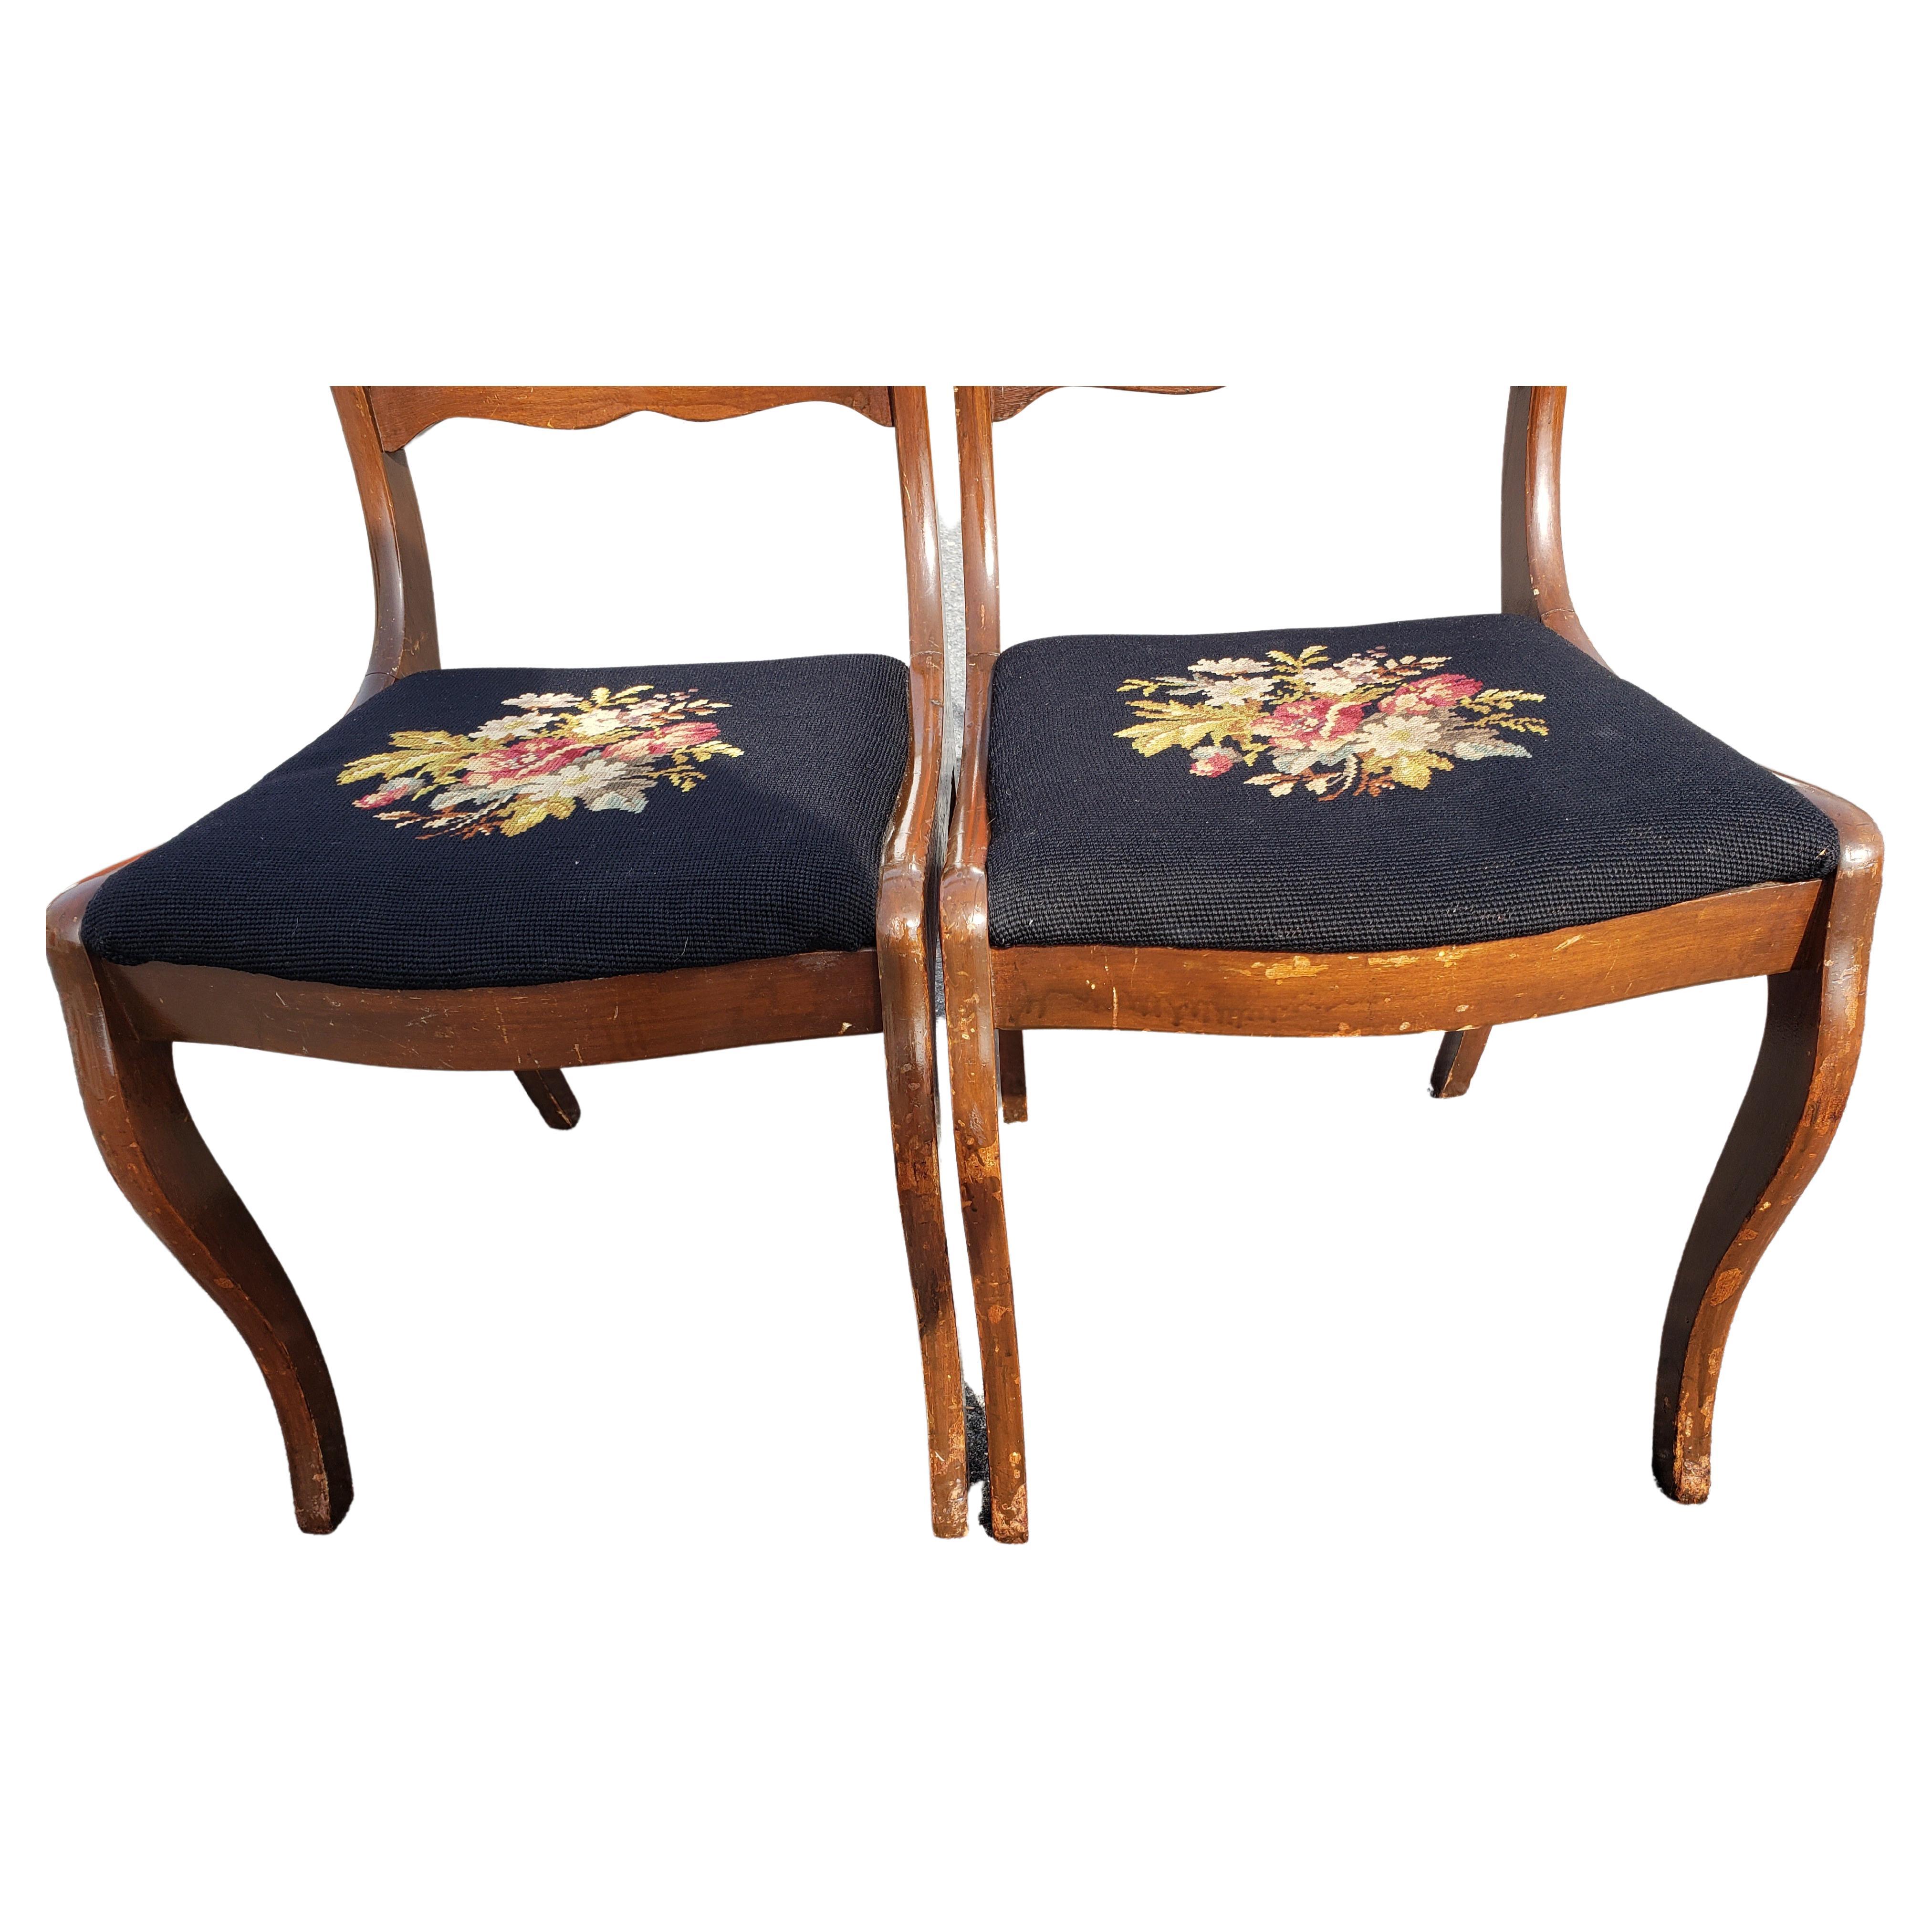 20th Century 1940s Carved Ladder Back Needlepoint Seat Chairs, A pair For Sale